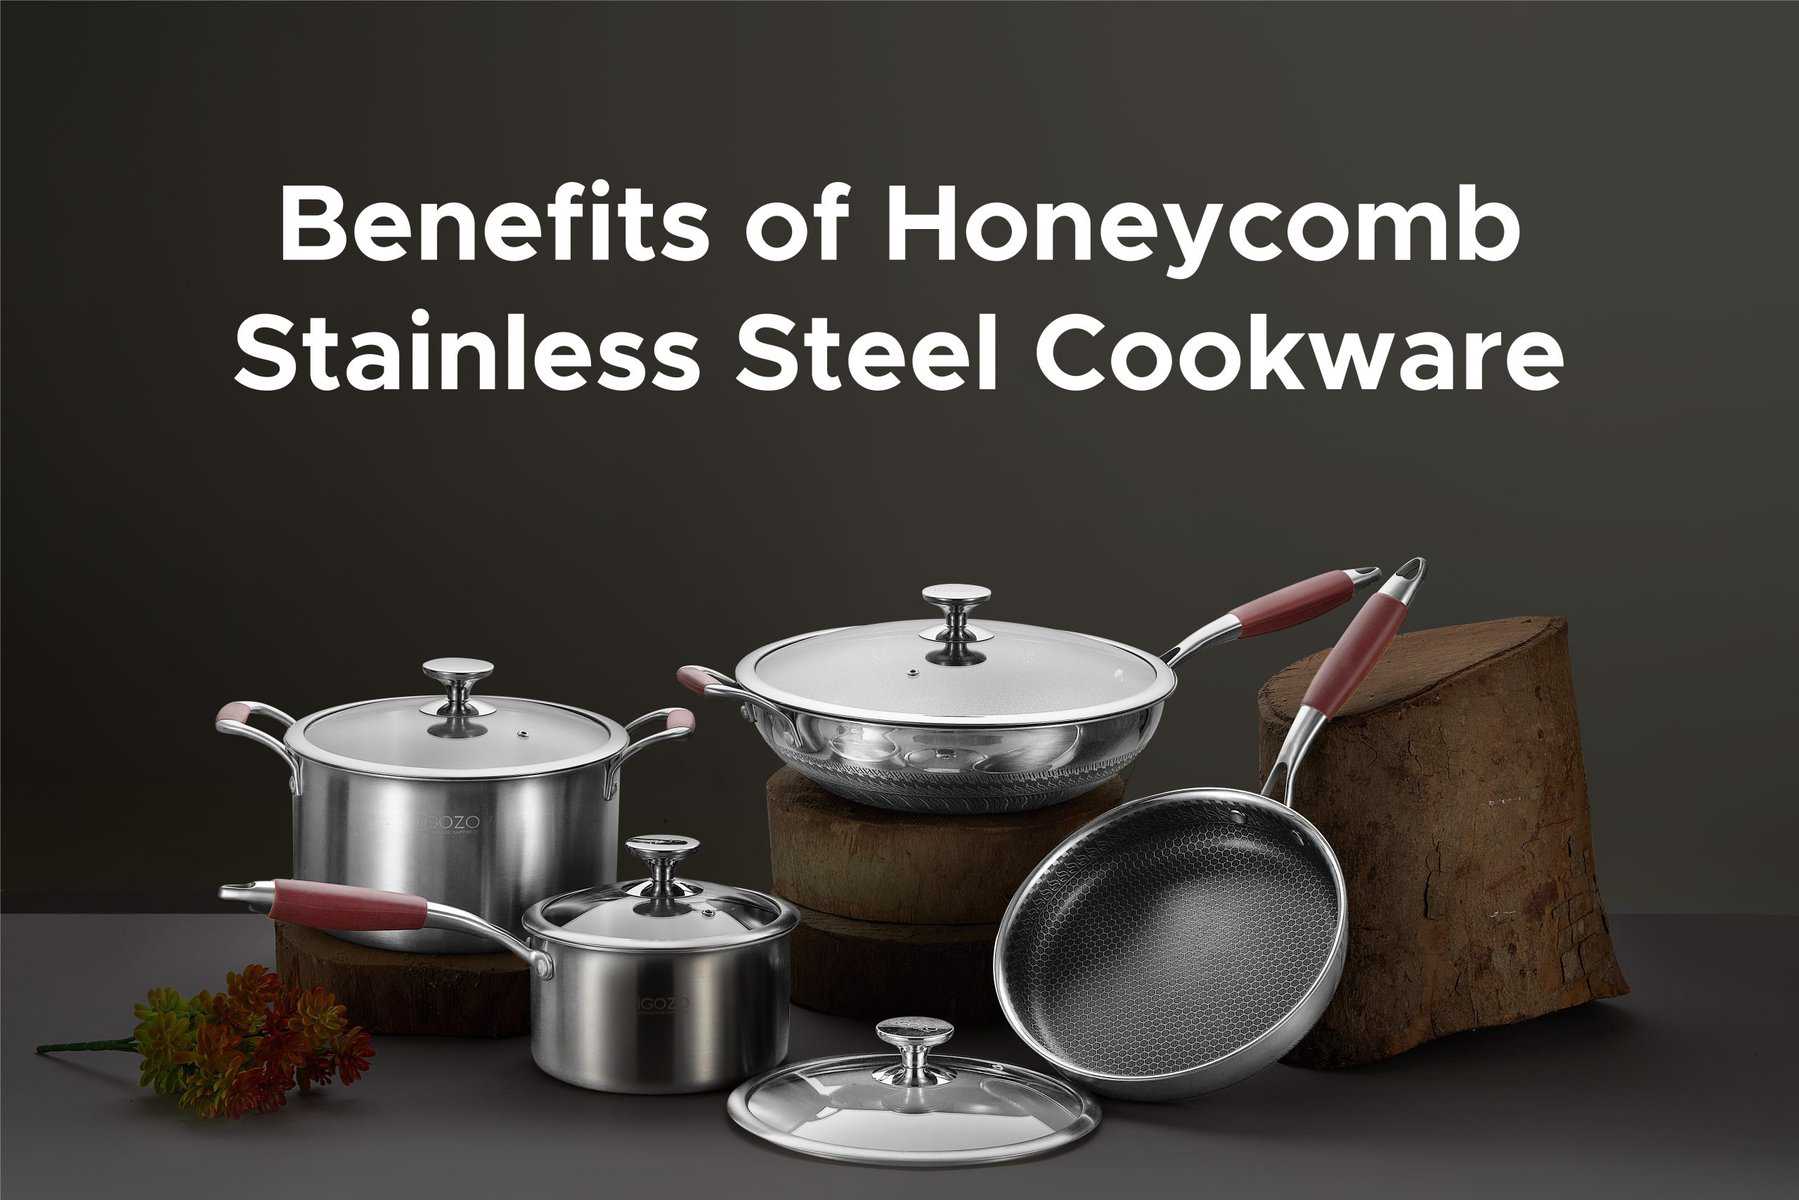 Honeycomb Stainless Steel Cookware